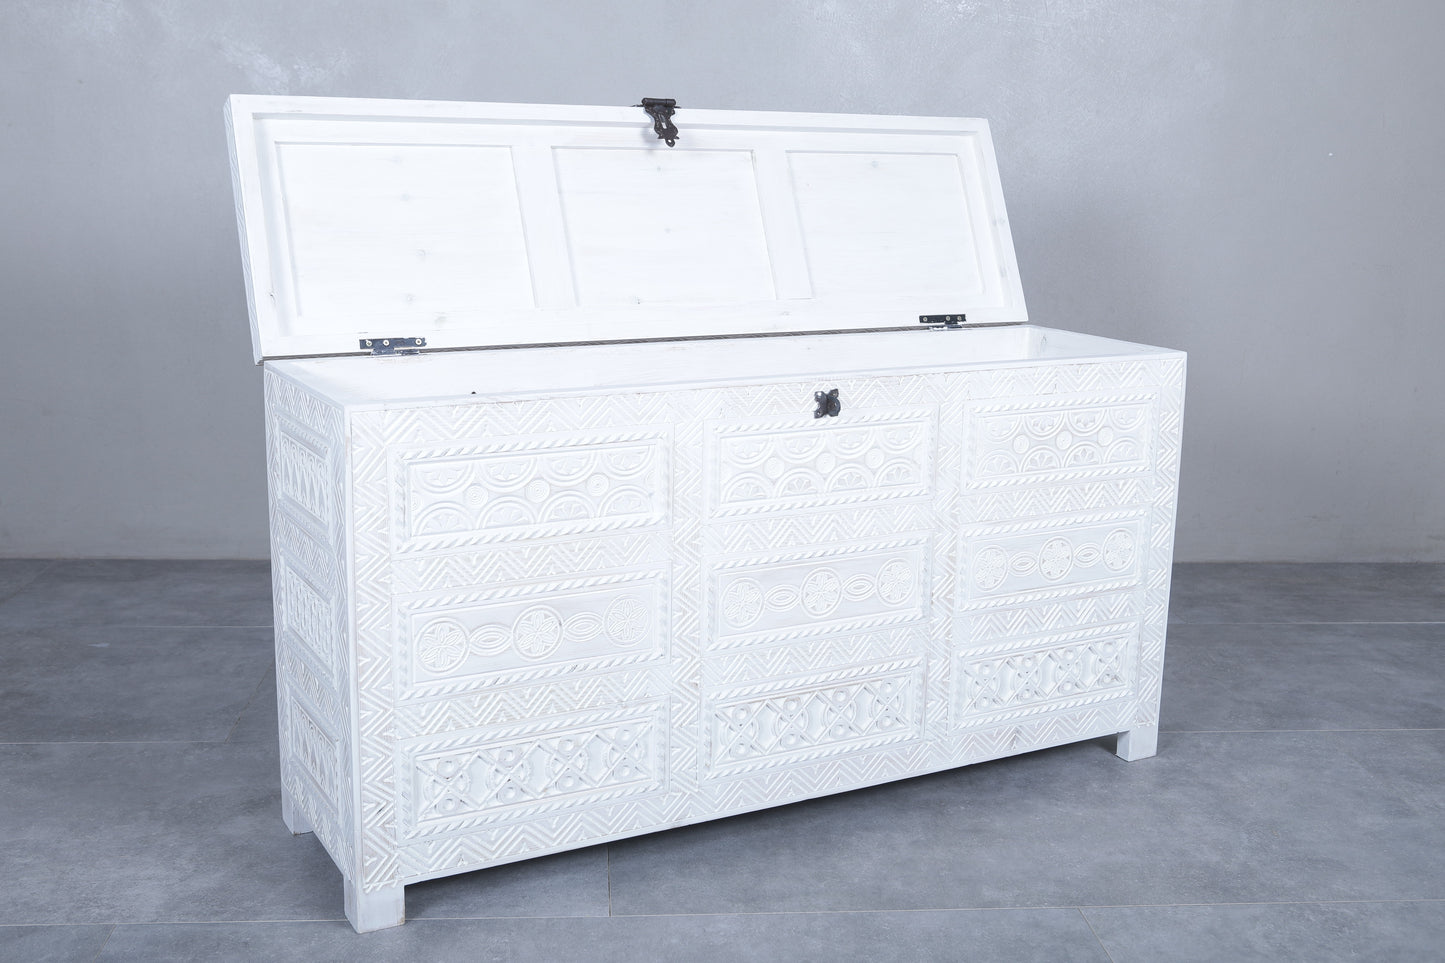 Vintage Moroccan chest  H 27.9 inches x W 51.5 inches x D 14.5 inches